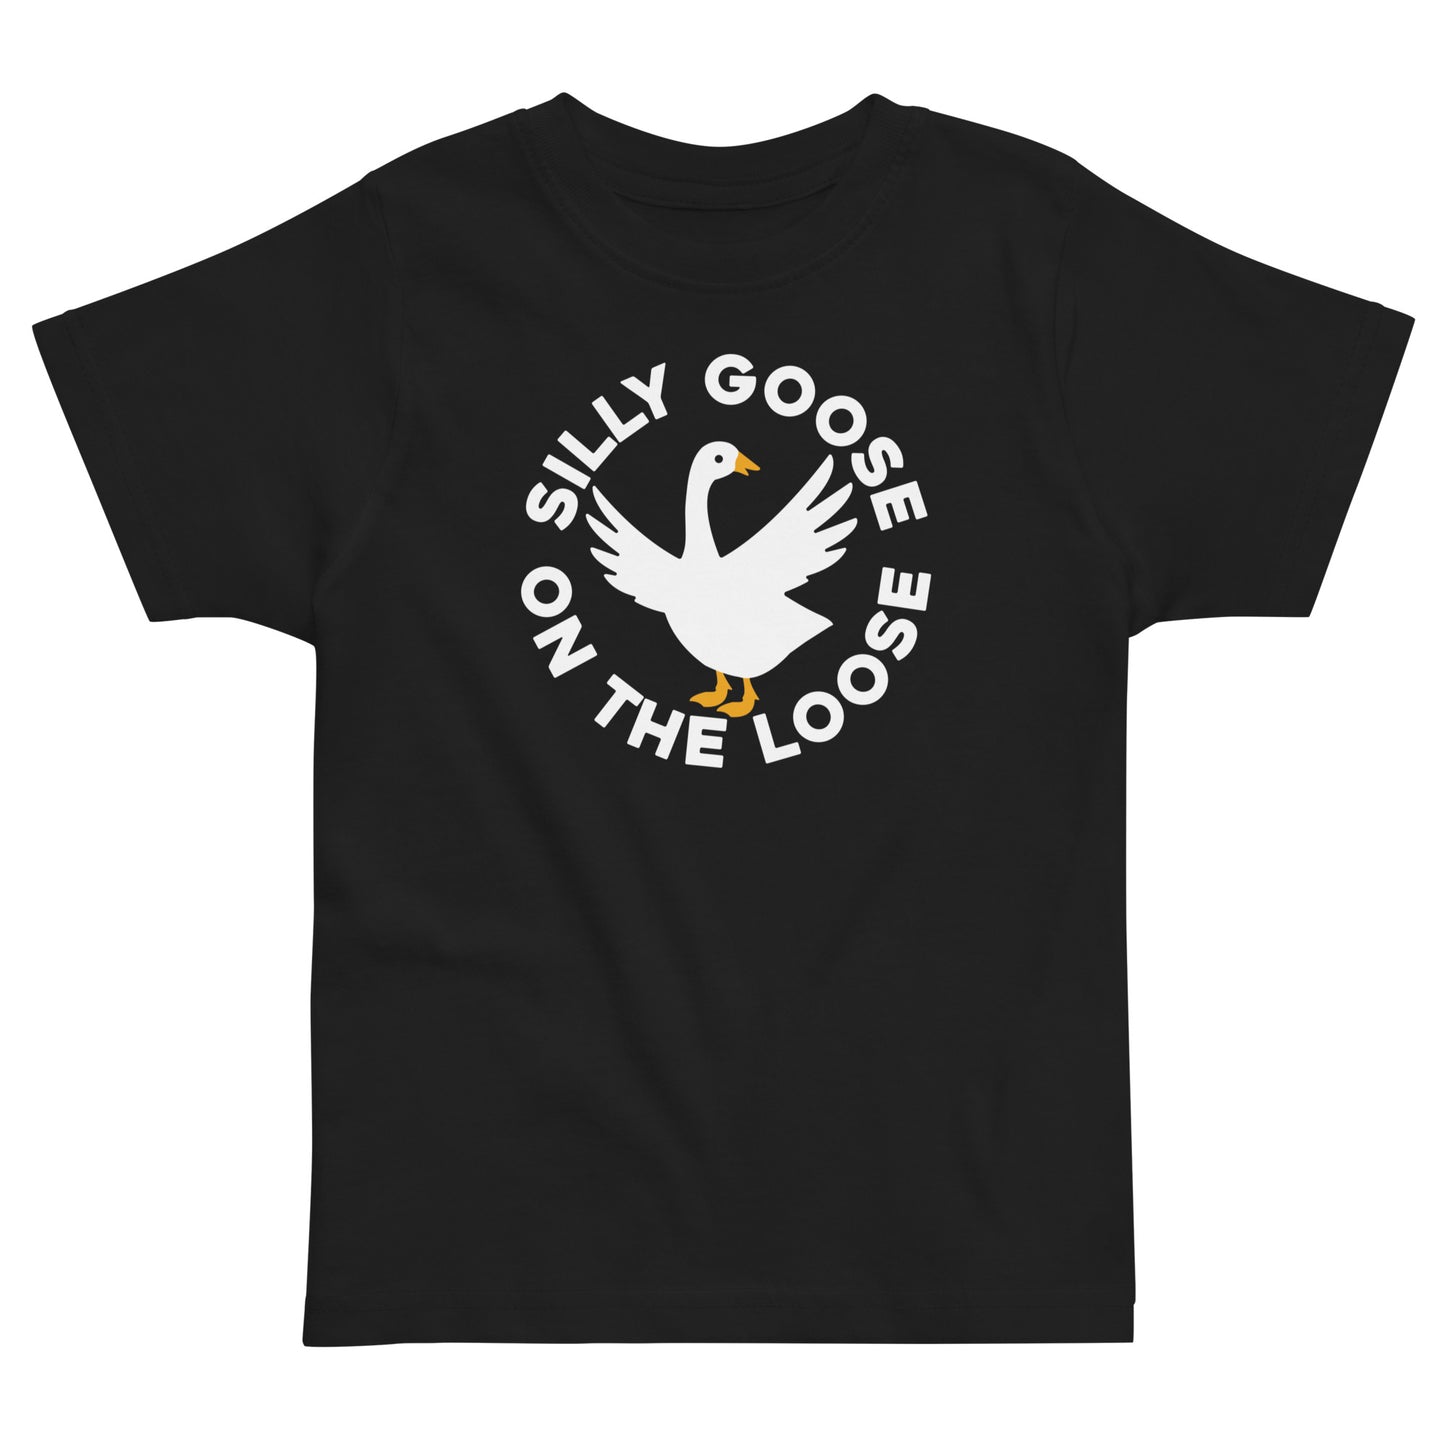 Silly Goose On The Loose Kid's Toddler Tee